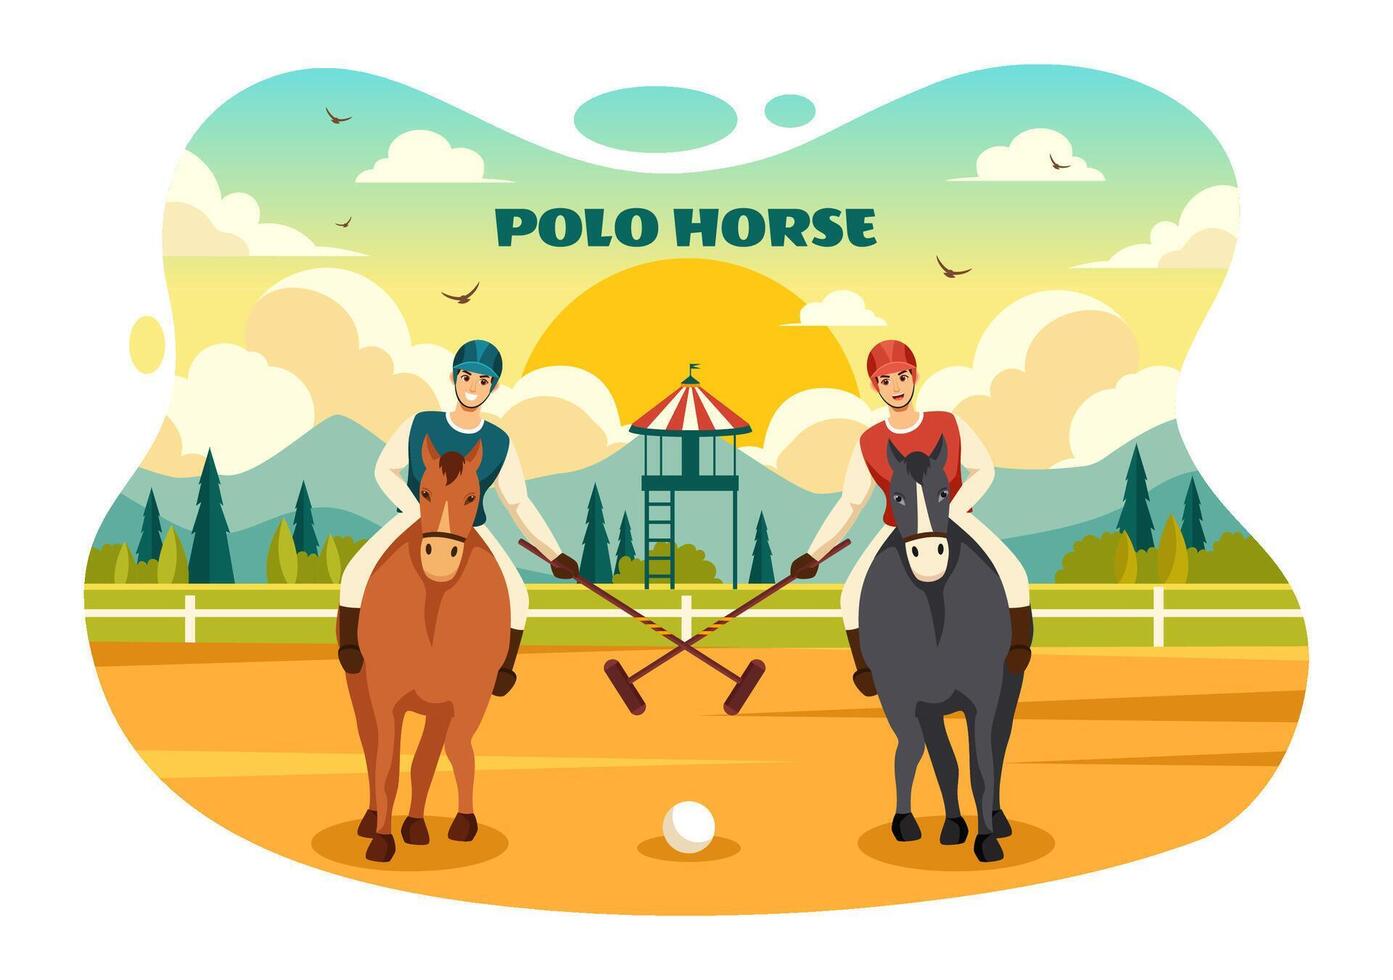 Polo Horse Sports Illustration with Player Riding Horse and Holding Stick use Equipment Set to Competition in Flat Cartoon Background vector